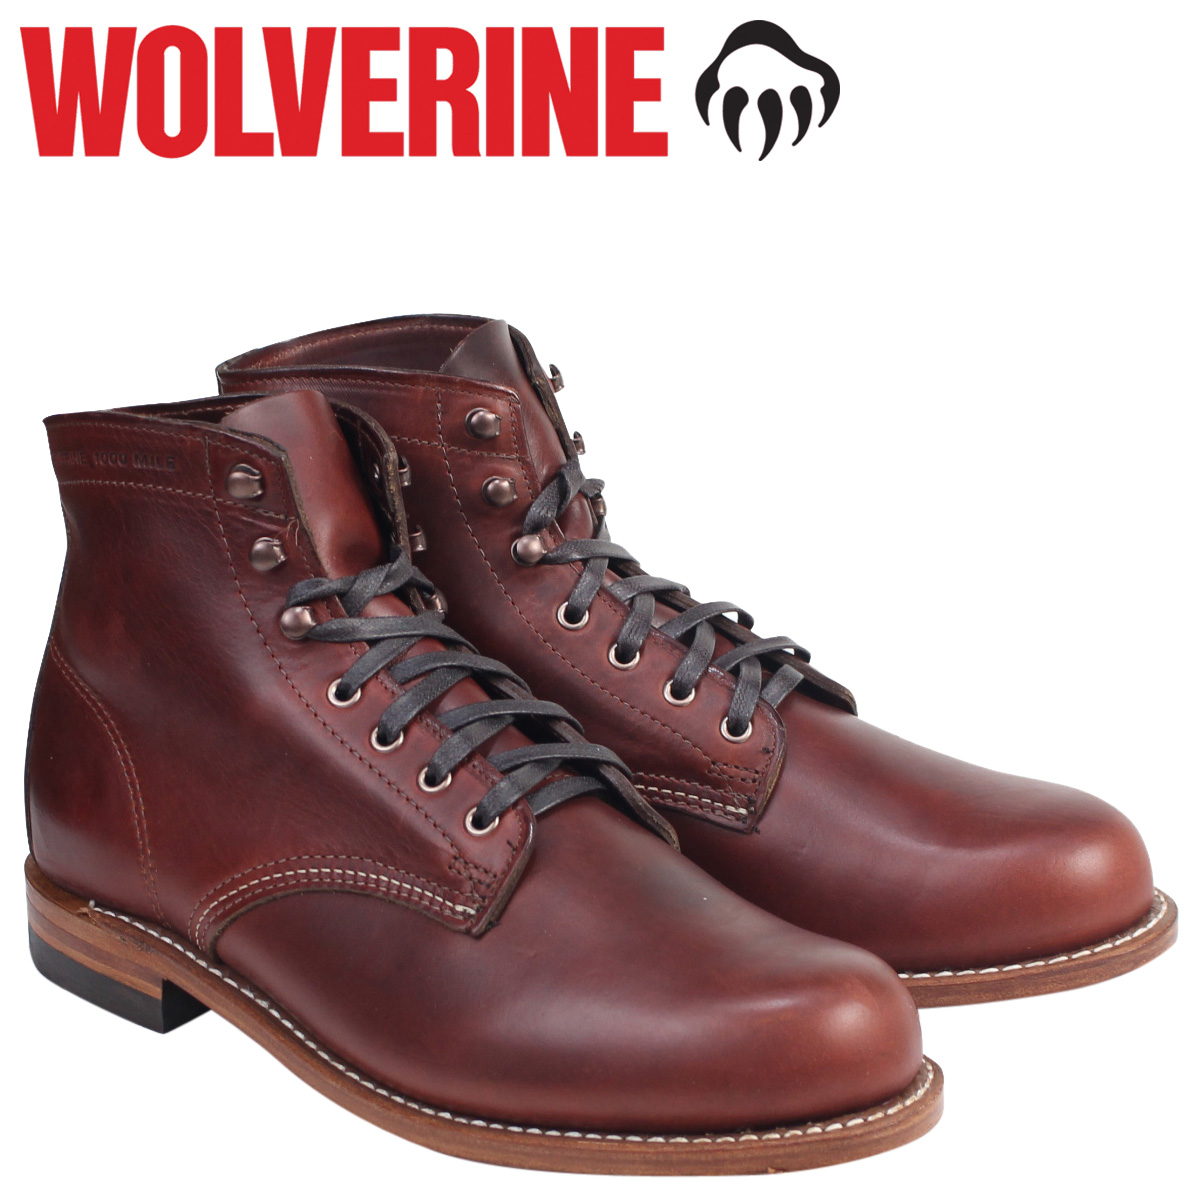 the wolverine 1000 mile boot